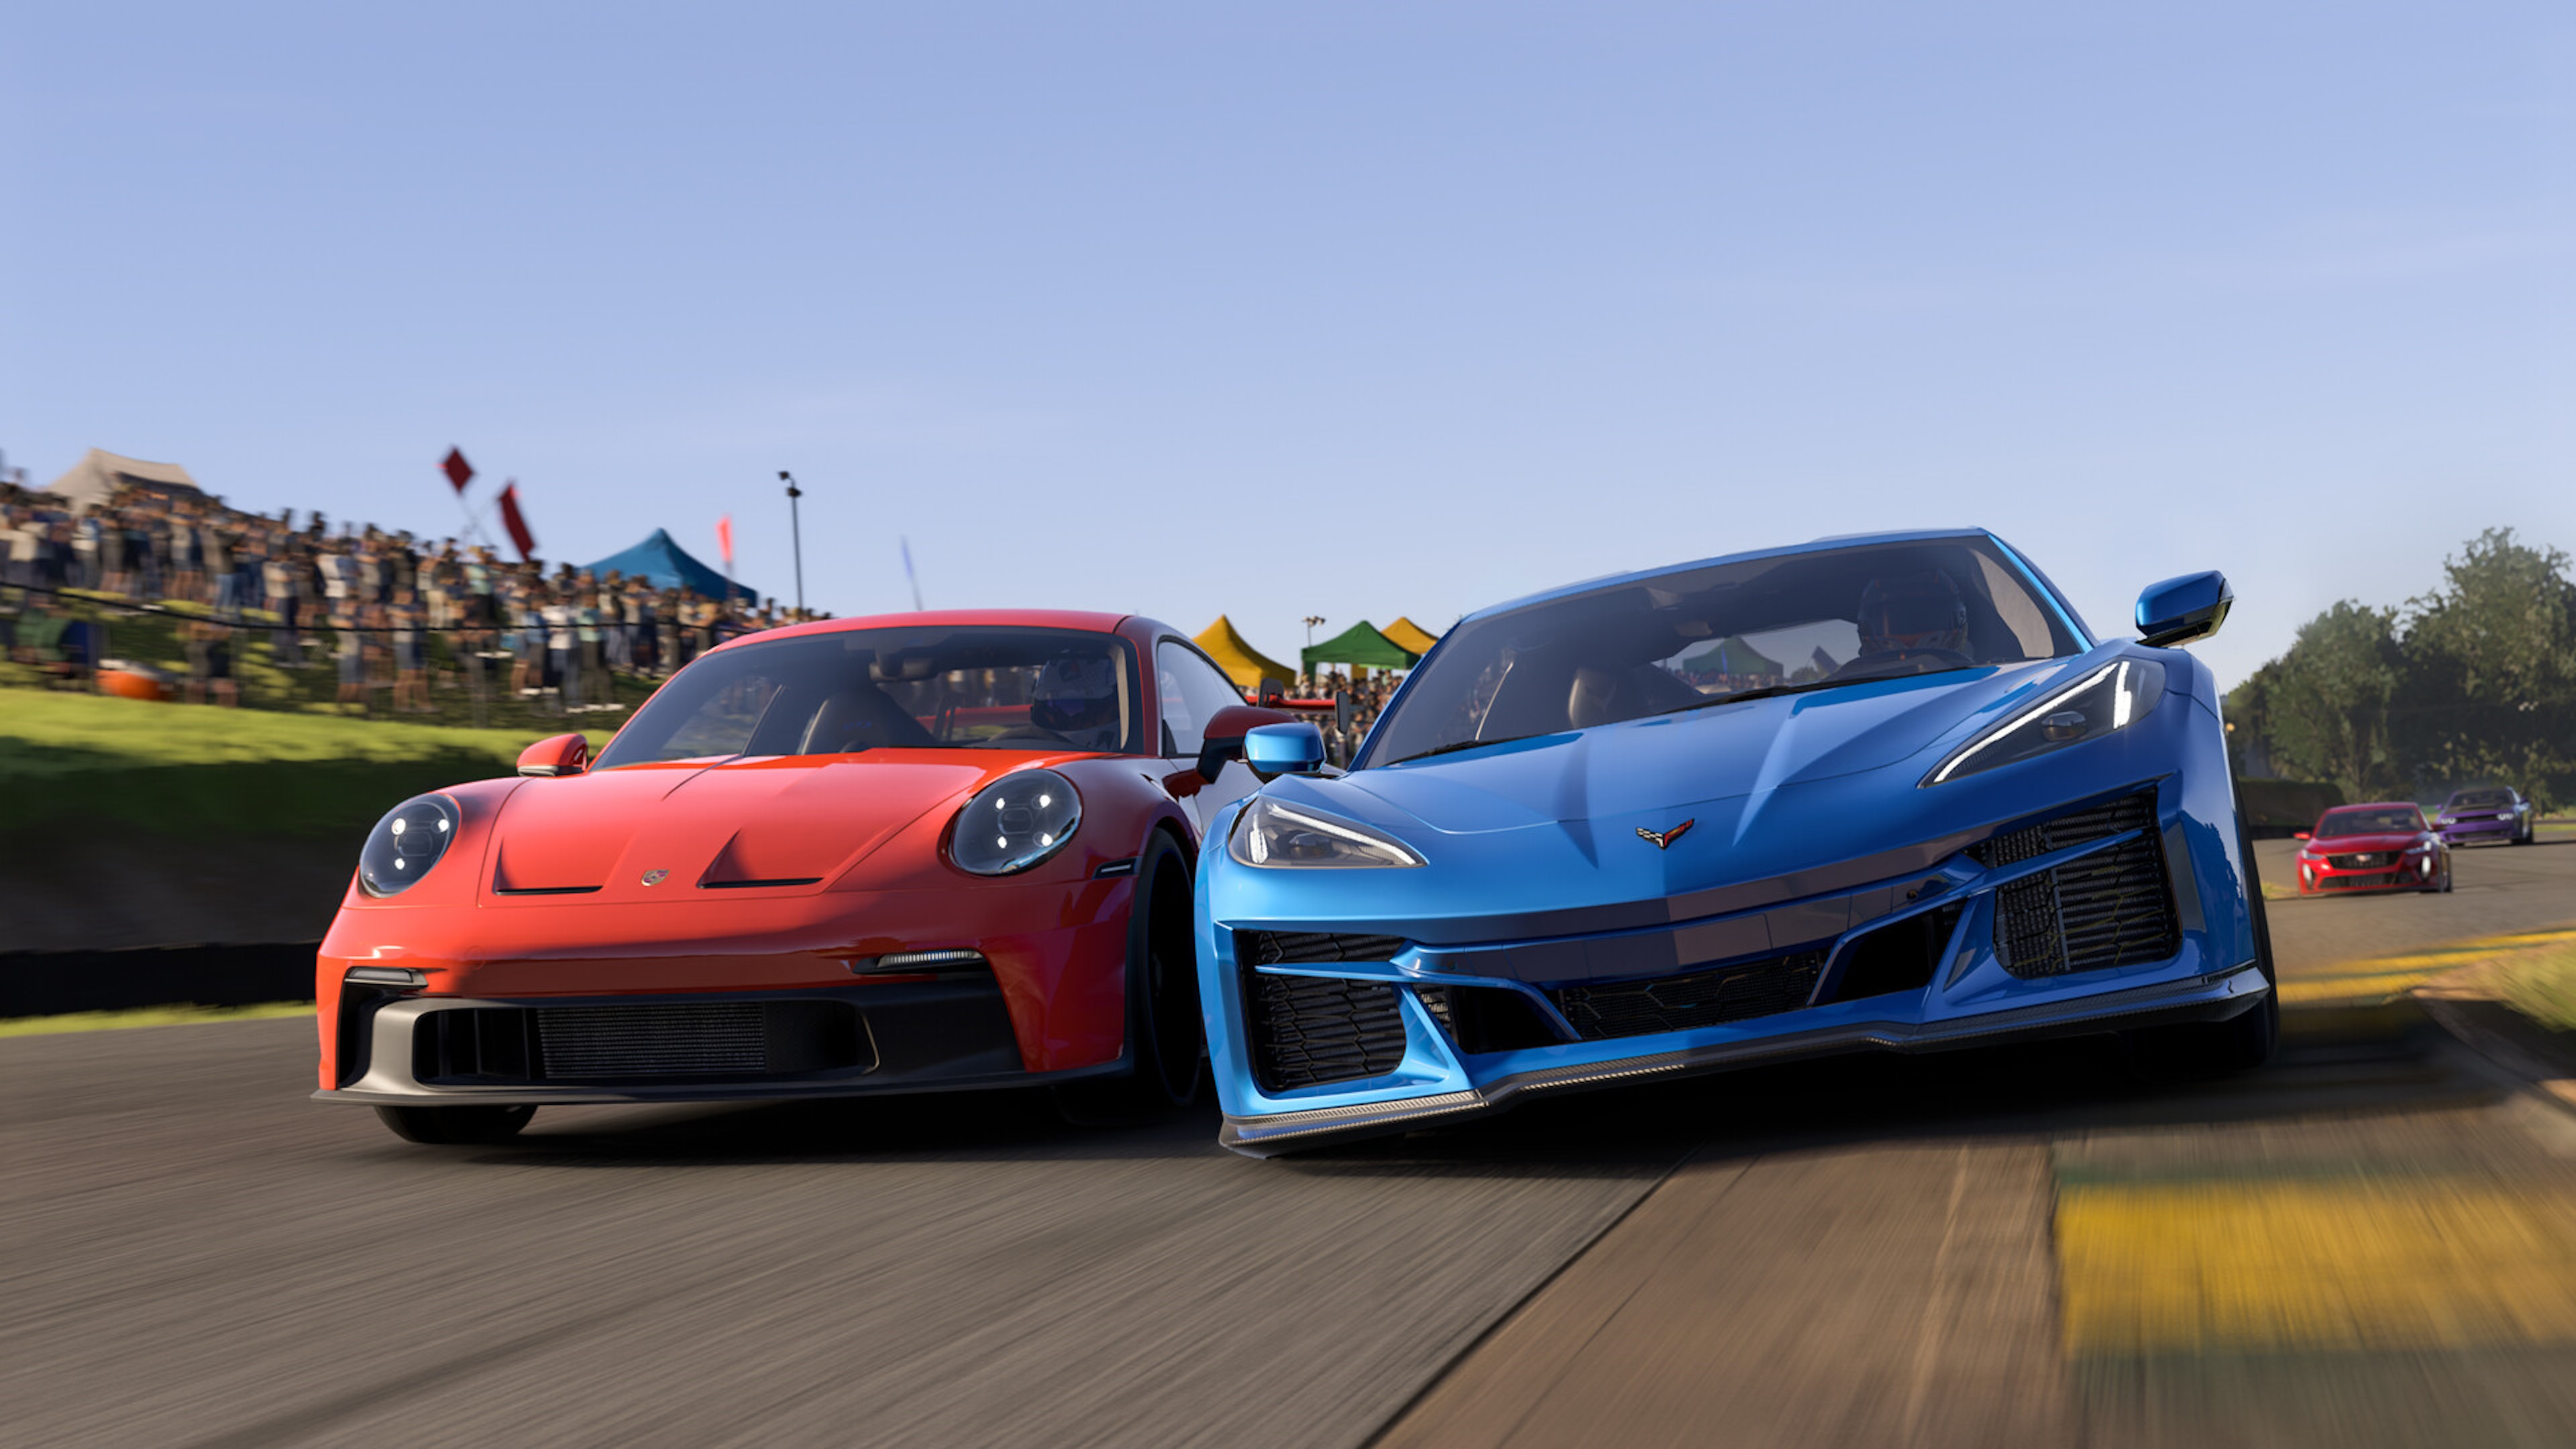  Forza Motorsport's 'ideal' system requirements demand an RTX 4080 and an NvME SSD 